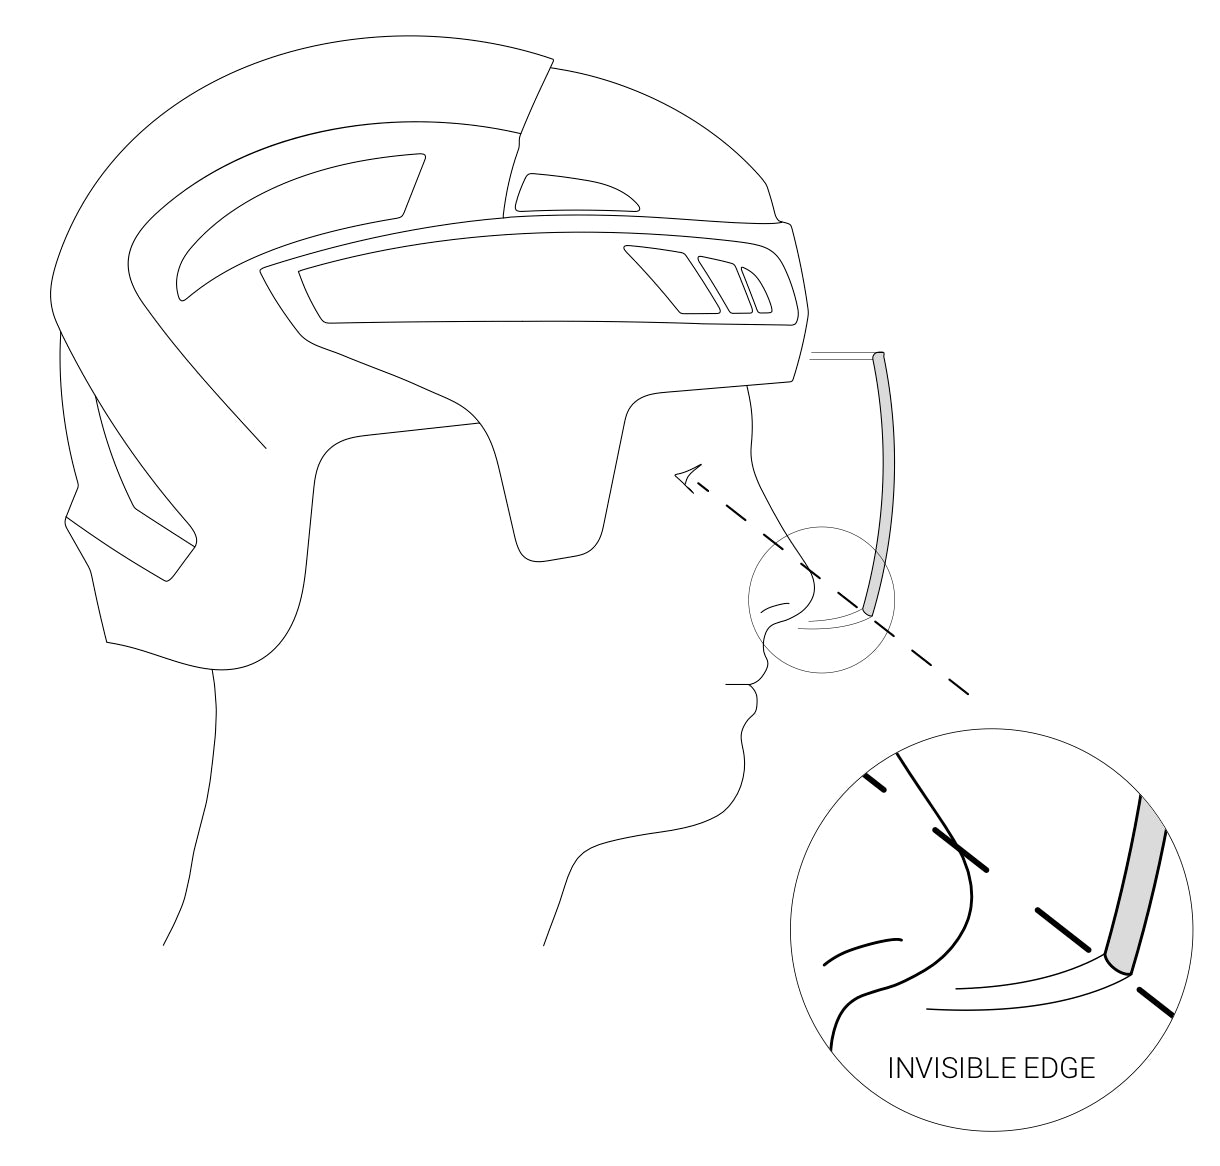 Photo displaying the invisible edge tech implemented on the hockey ninja hero 3 visor. Allows for a clear line of sight.